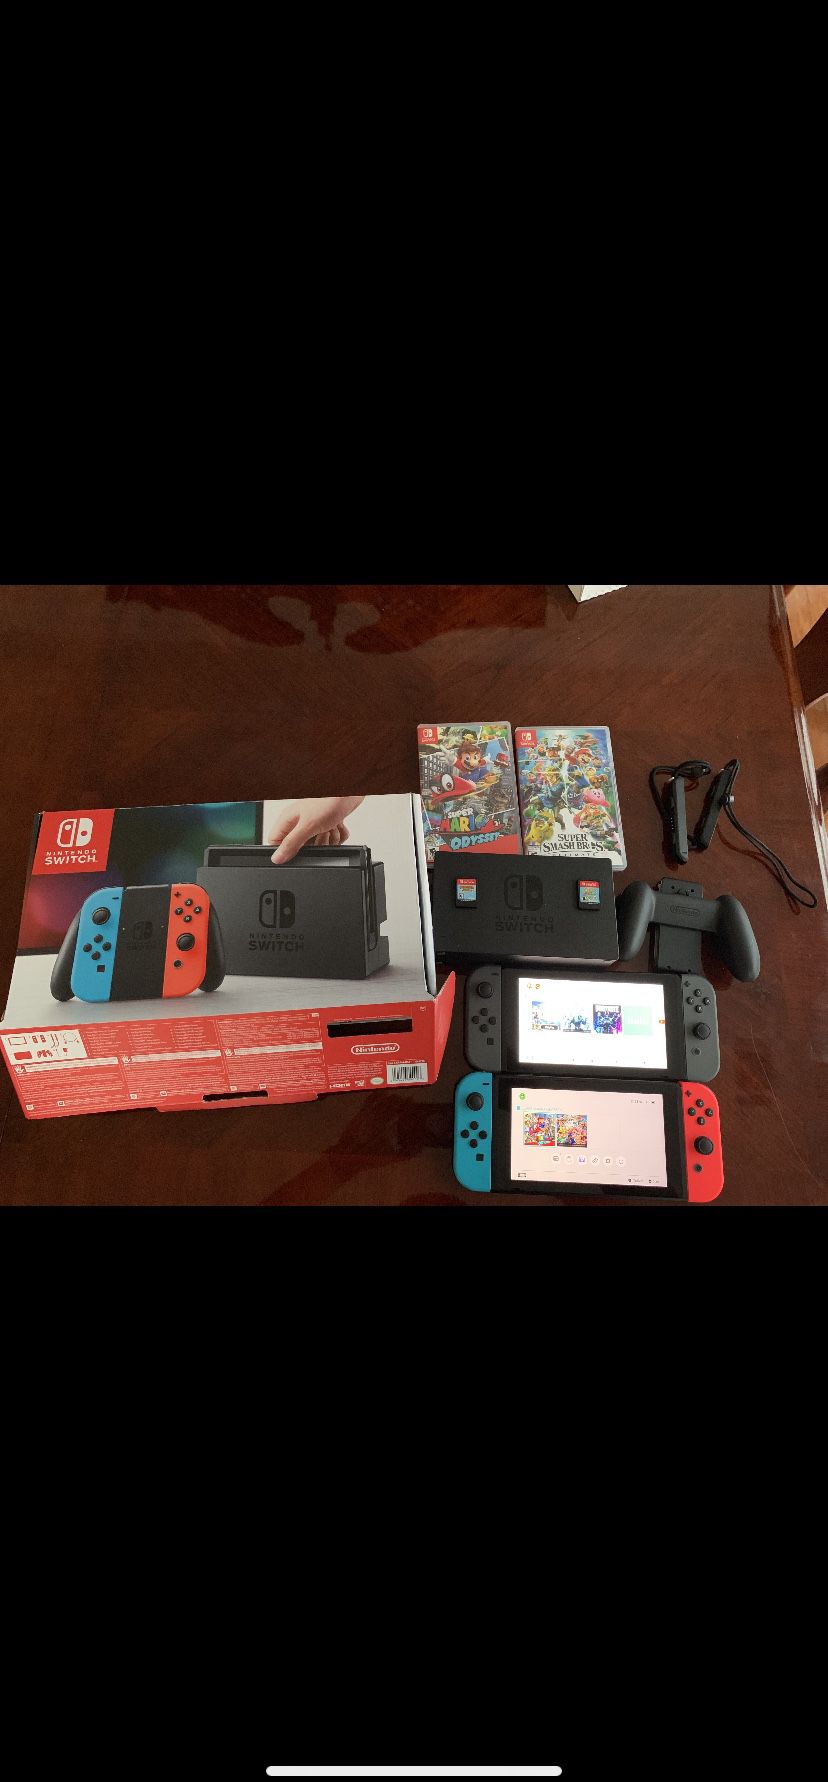 Nintendo switch with 5 games dock and box